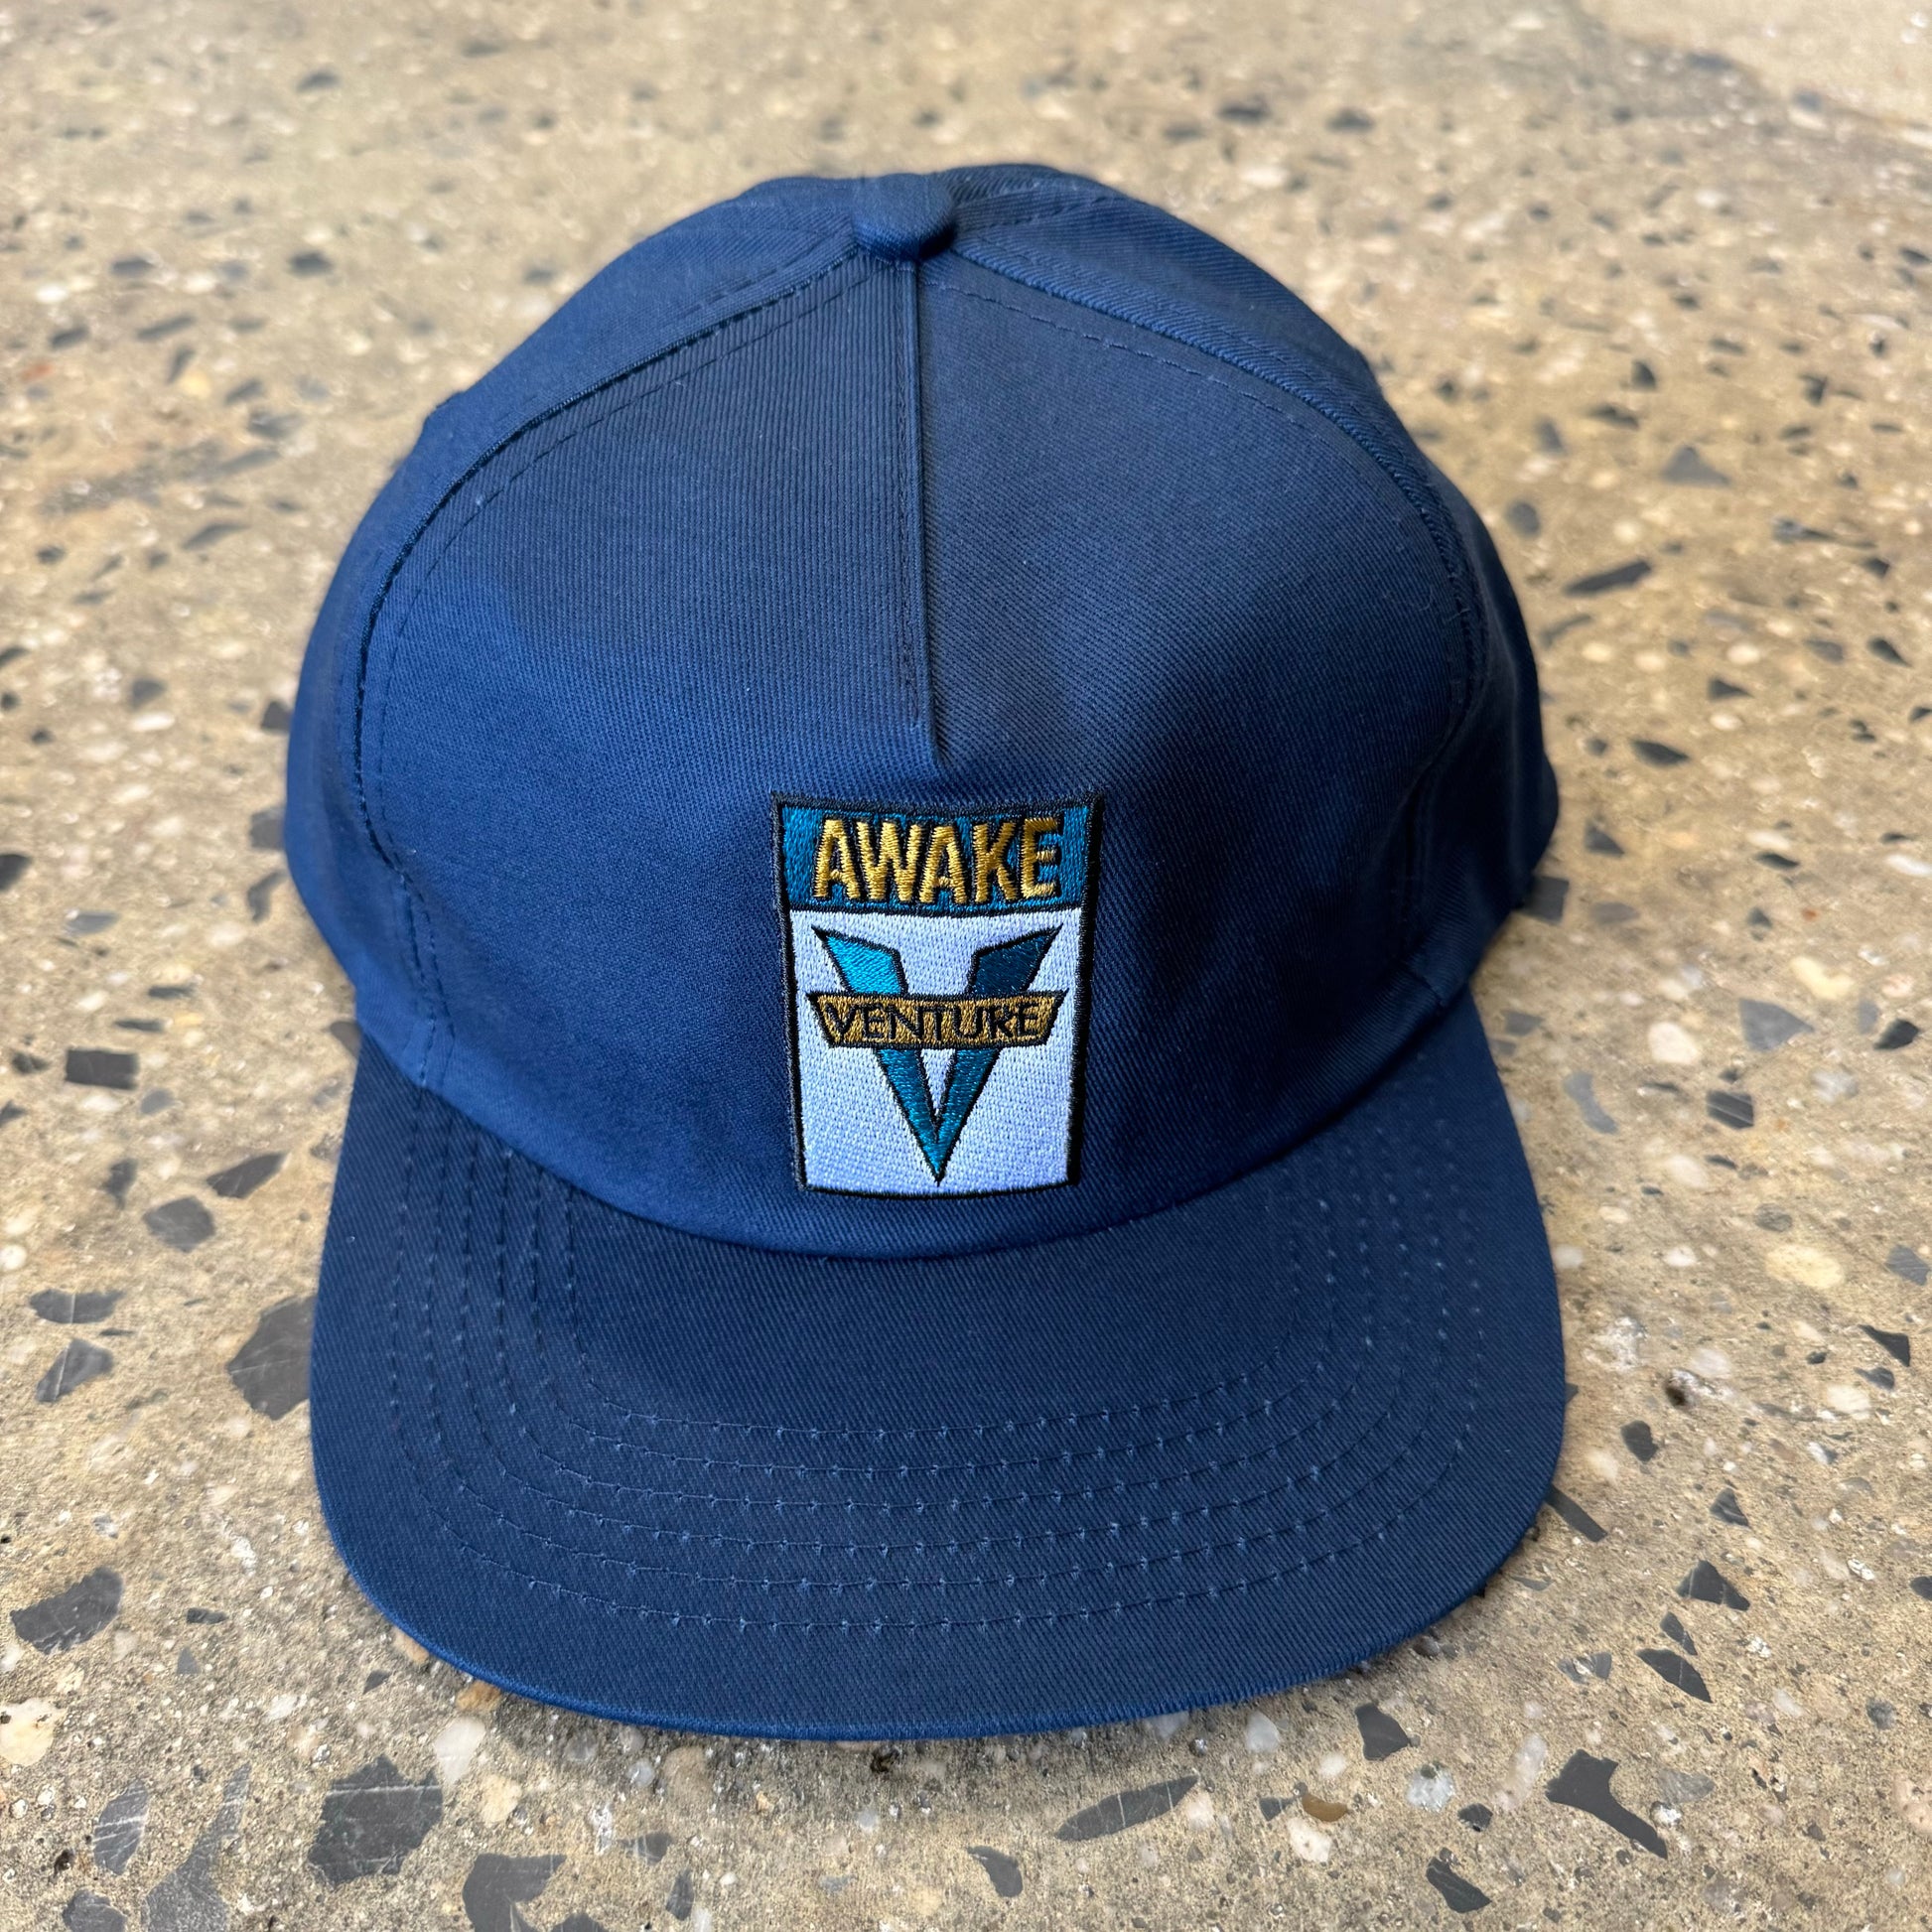 navy hat with venture logo in teal/yellow text in the center of the hat